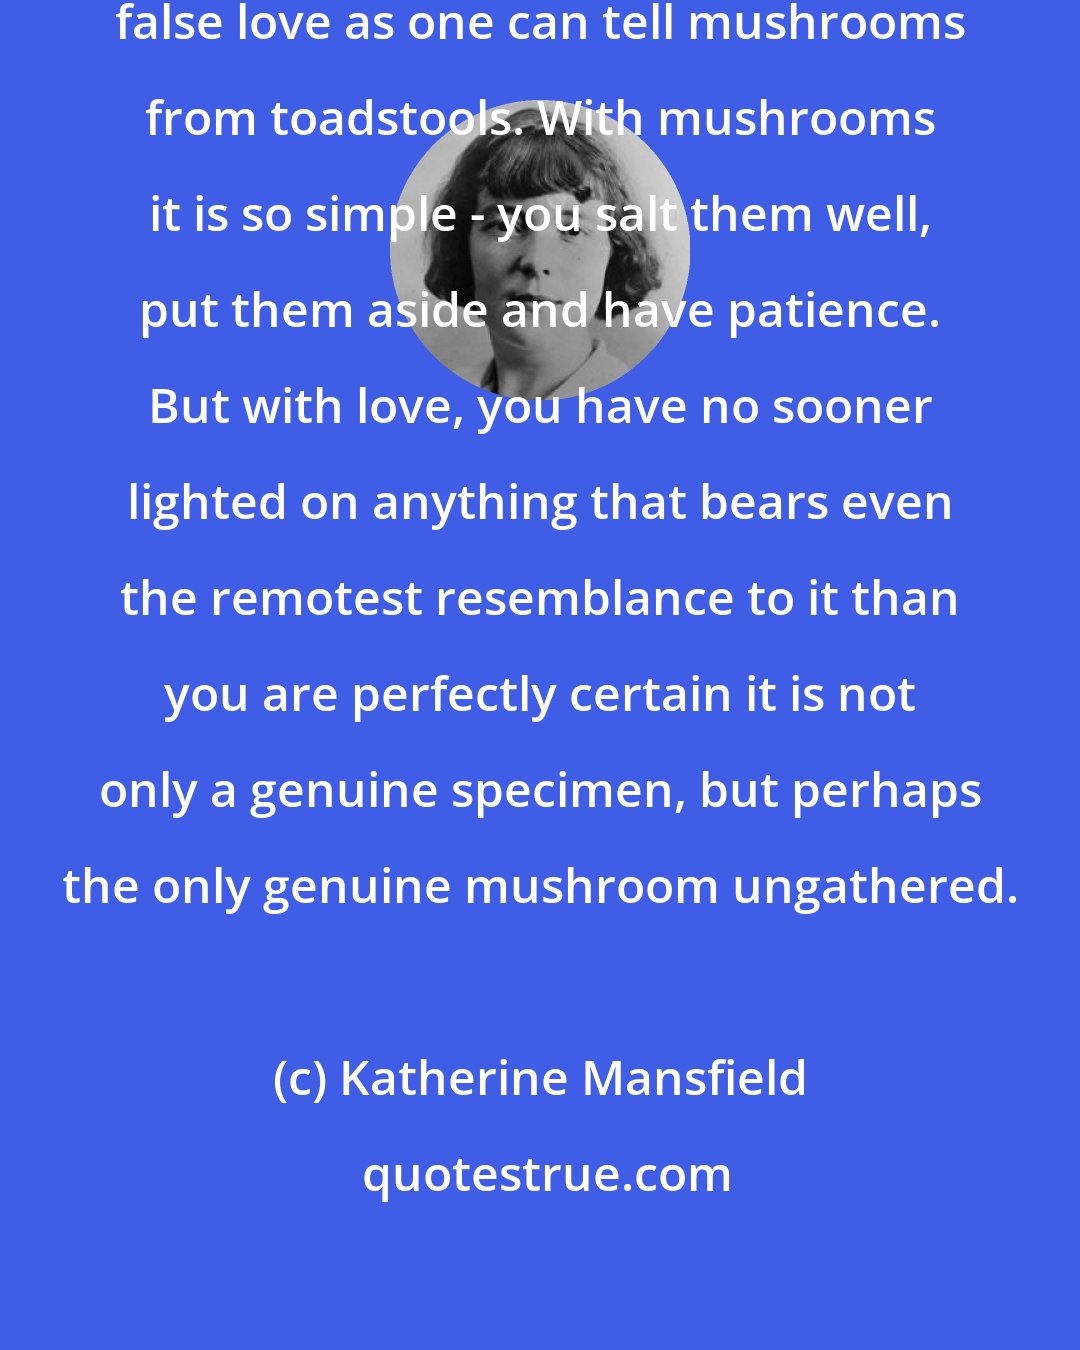 Katherine Mansfield: If only one could tell true love from false love as one can tell mushrooms from toadstools. With mushrooms it is so simple - you salt them well, put them aside and have patience. But with love, you have no sooner lighted on anything that bears even the remotest resemblance to it than you are perfectly certain it is not only a genuine specimen, but perhaps the only genuine mushroom ungathered.